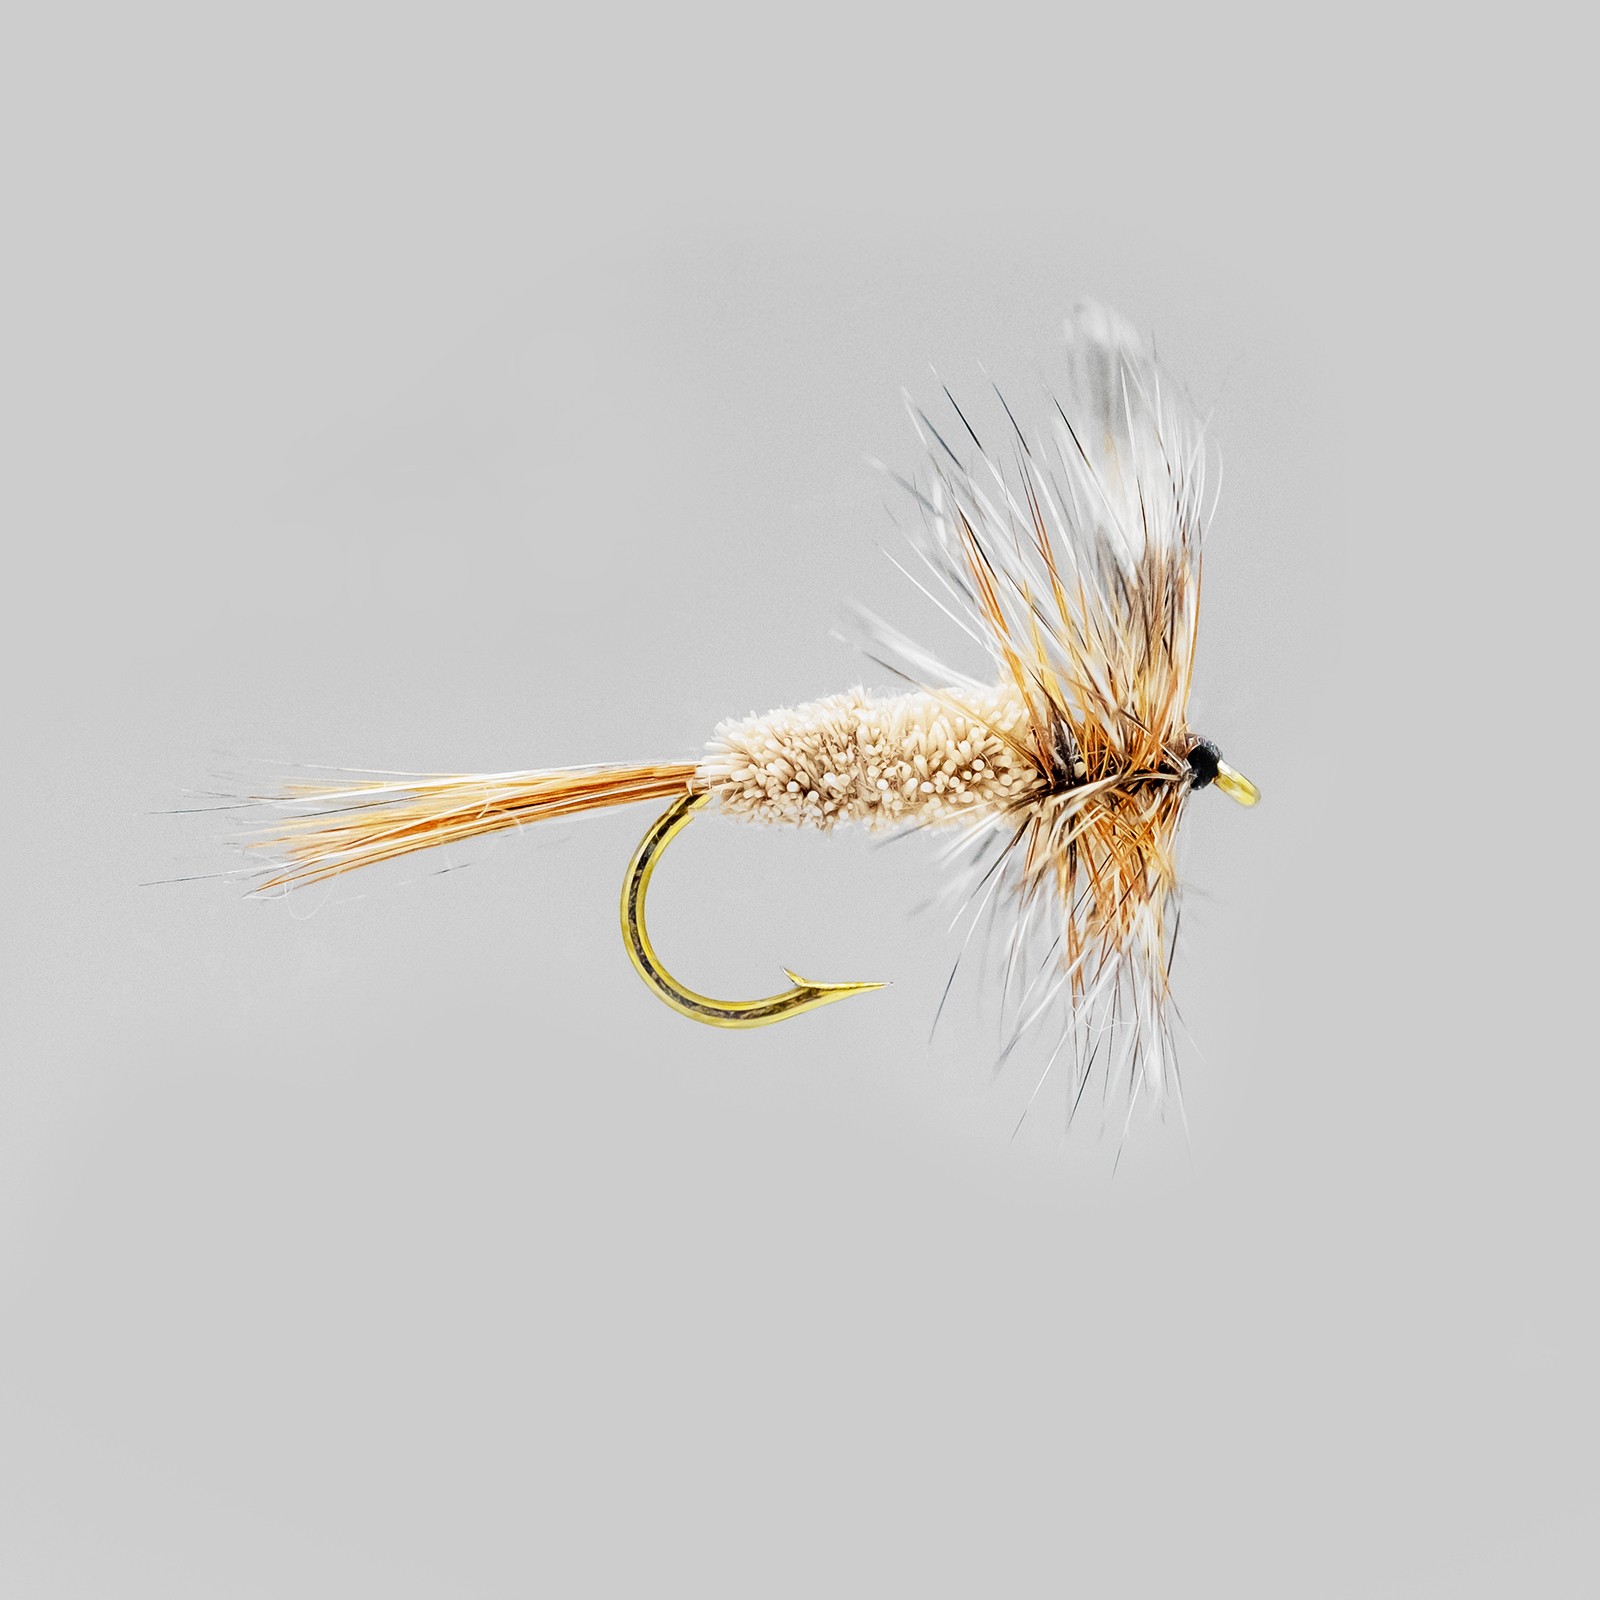 https://www.amimoucheur.com/6071/neptue-trout-flies-dry-adam-irrisistible.jpg